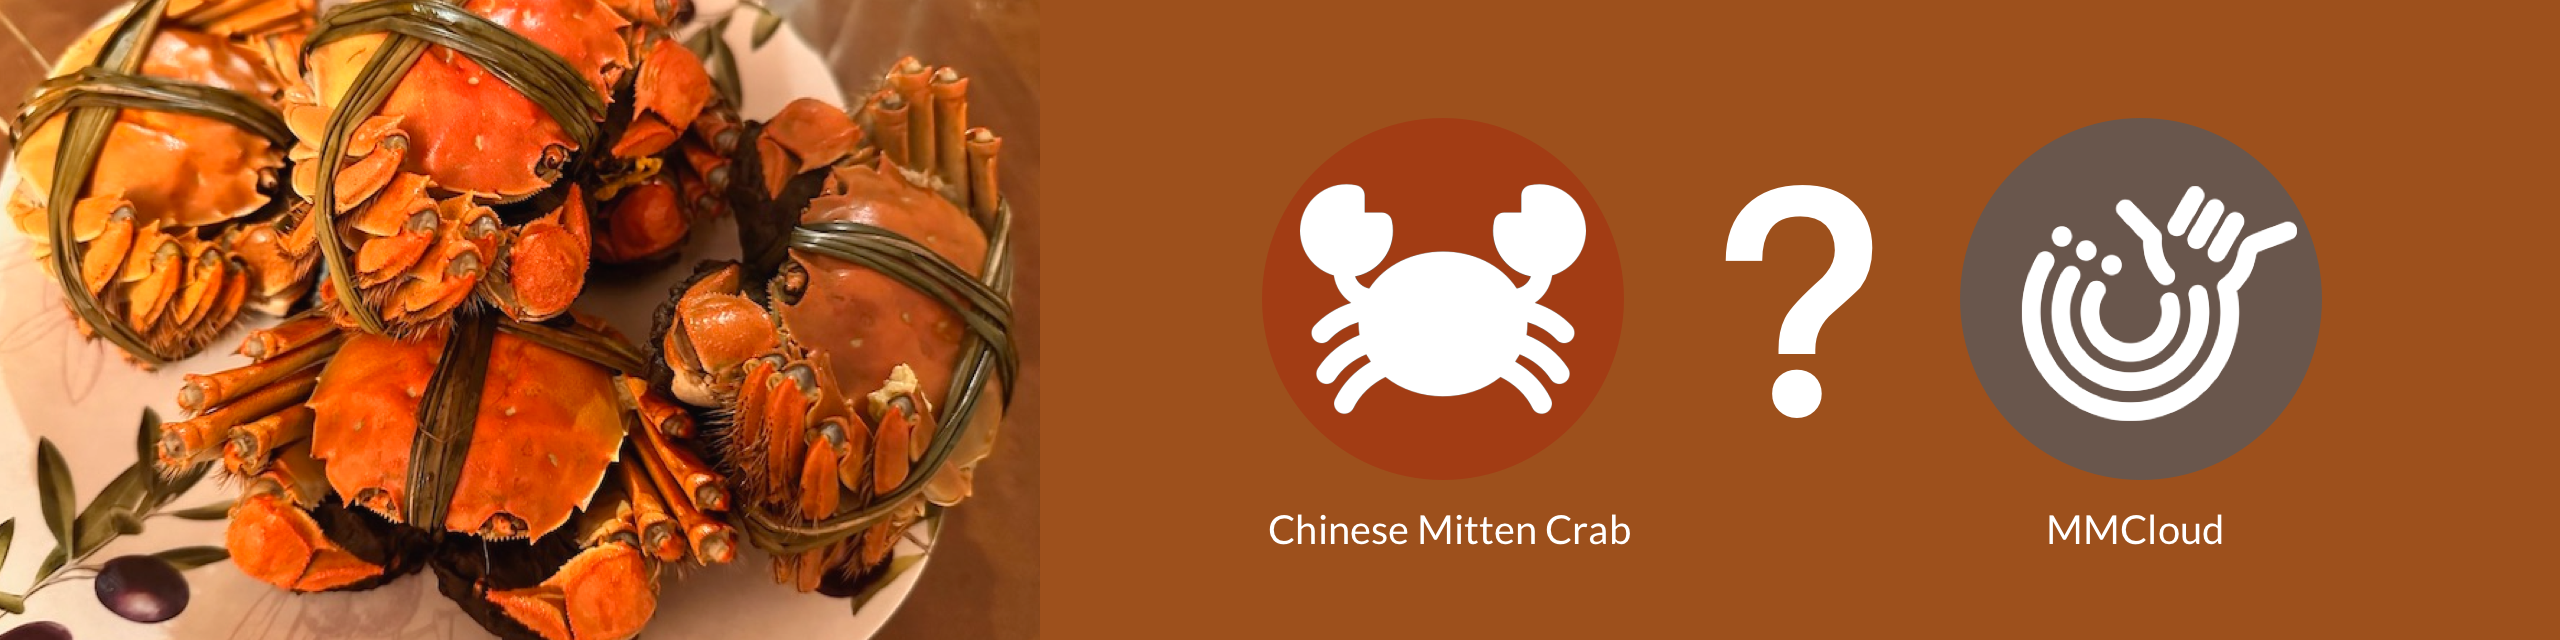 Chinese Mitten Crab - Culinary Delight, Scientific Puzzle